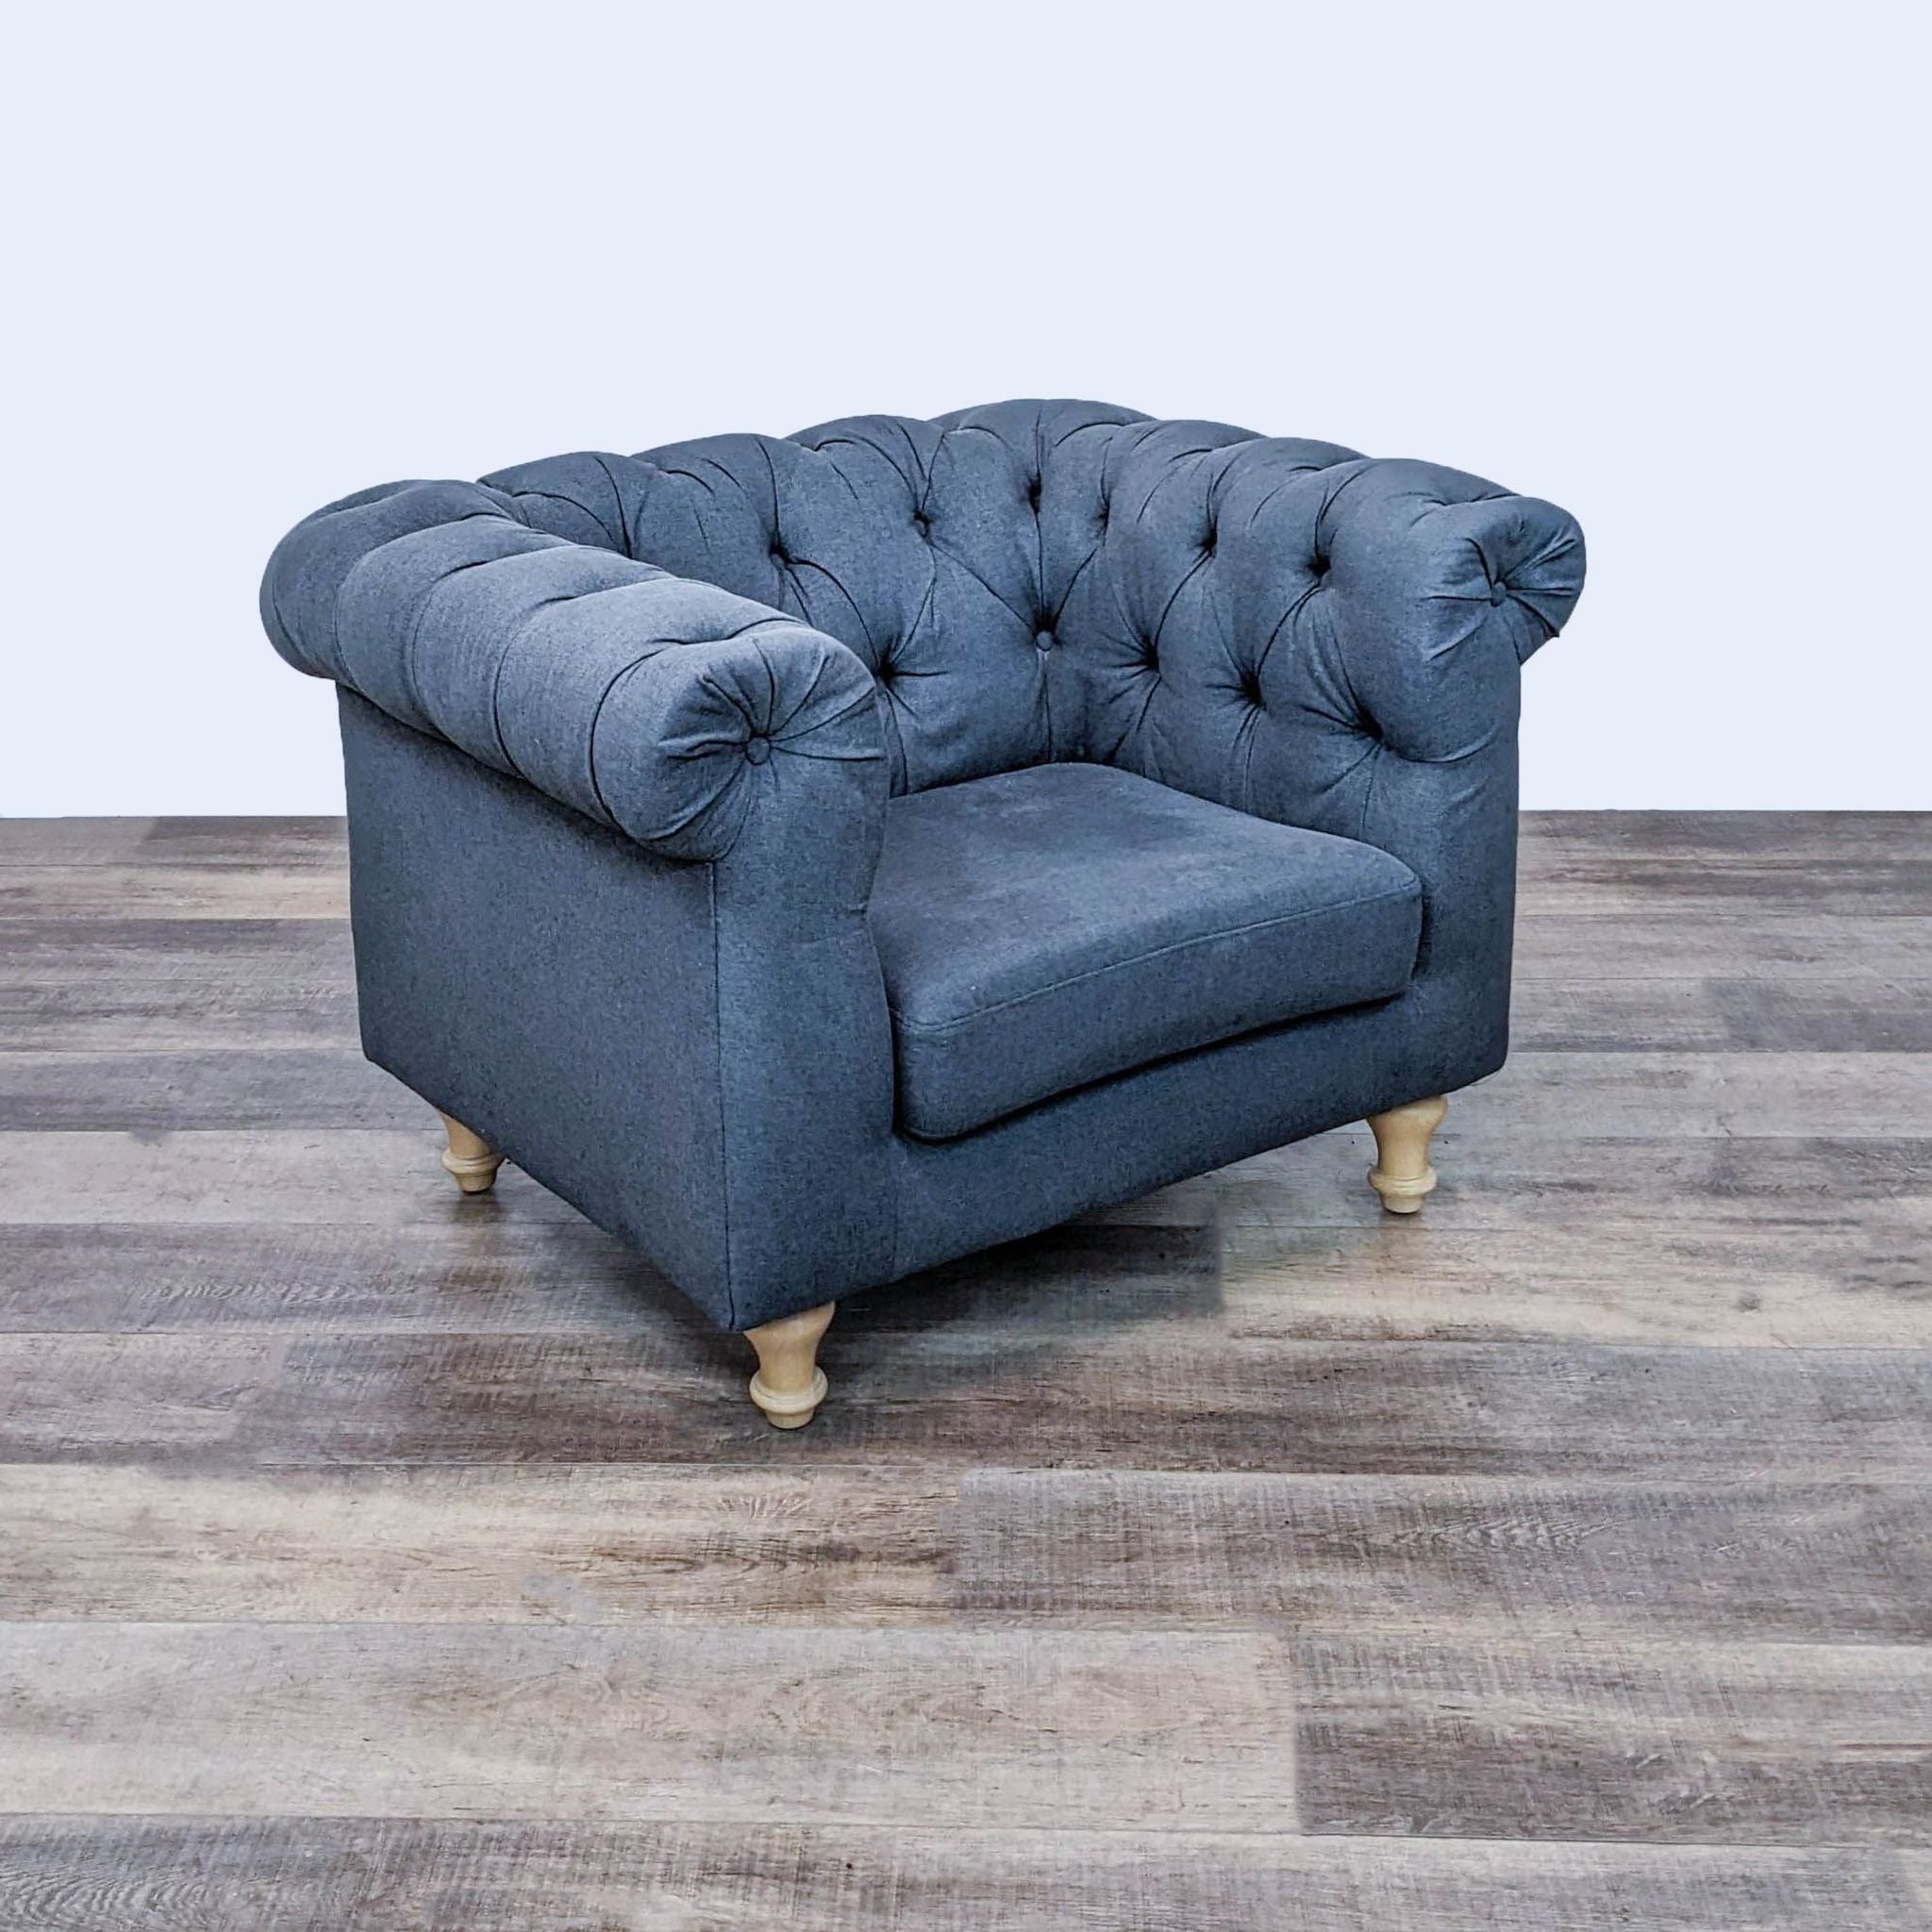 World Market club chair with rolled arms, turned wood feet, and button-tufted fabric upholstery.